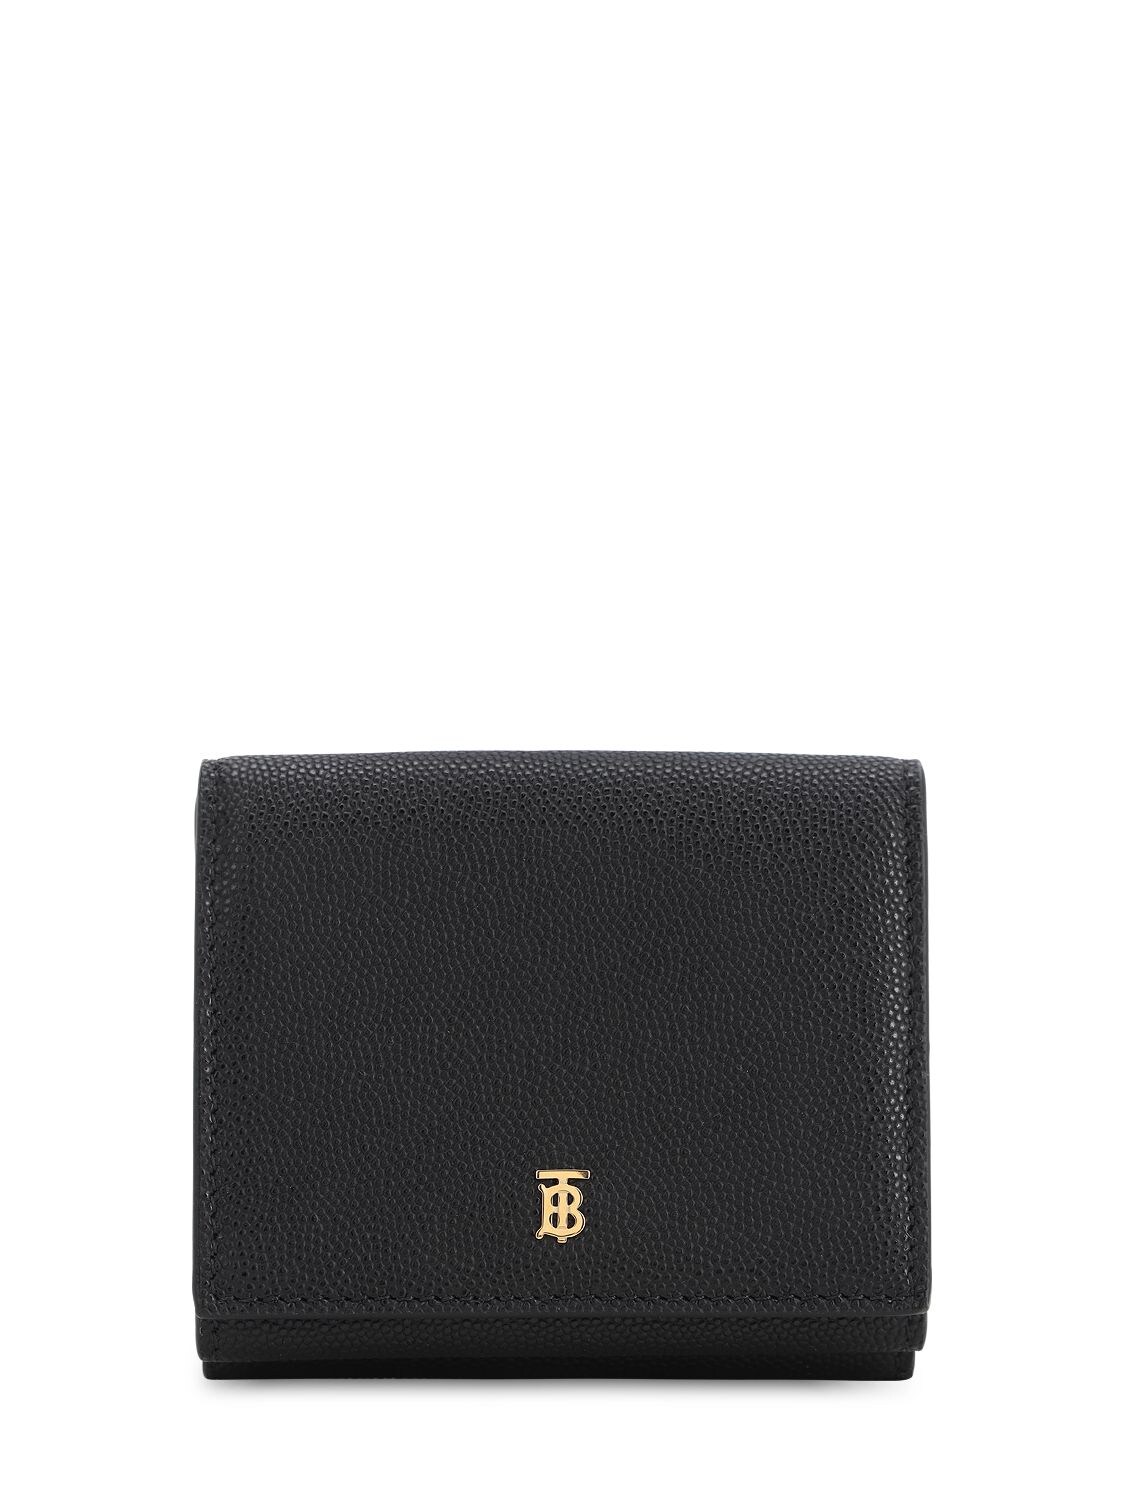 Burberry Luna Grained Leather Compact Wallet In Black